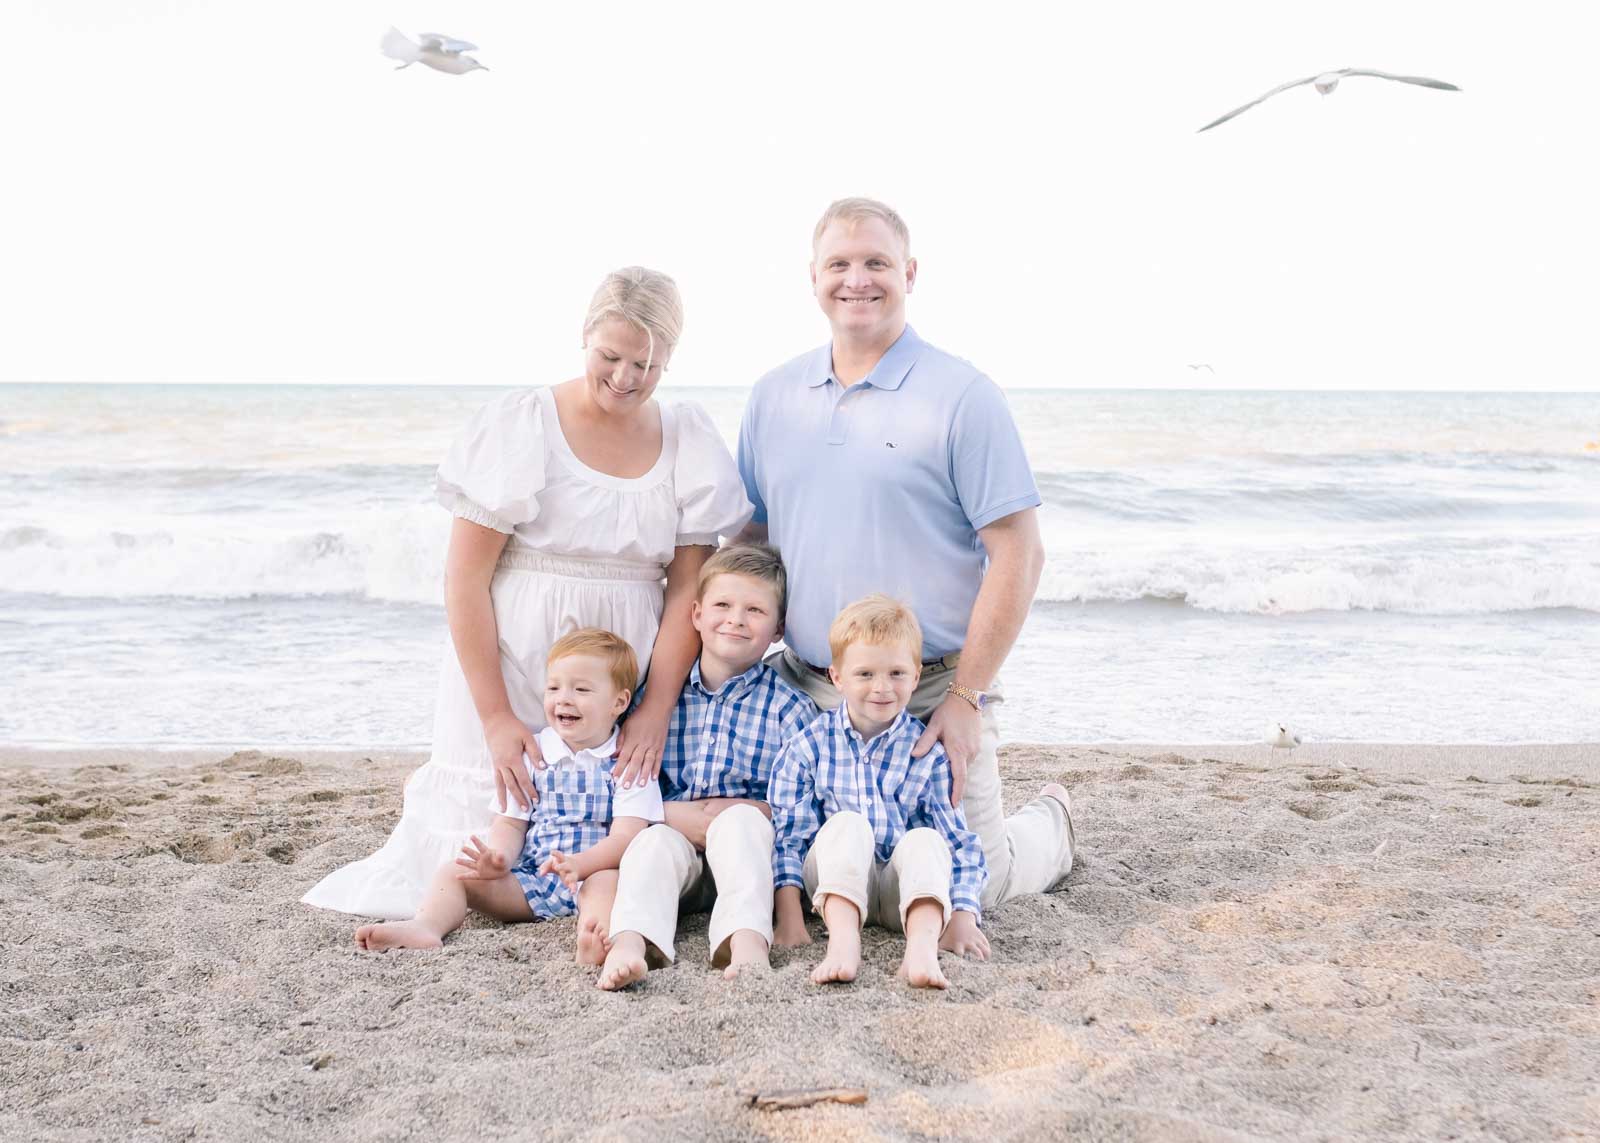 Wilmette photographer captures family posing for their annual portrait along Lake Michigan's beach.